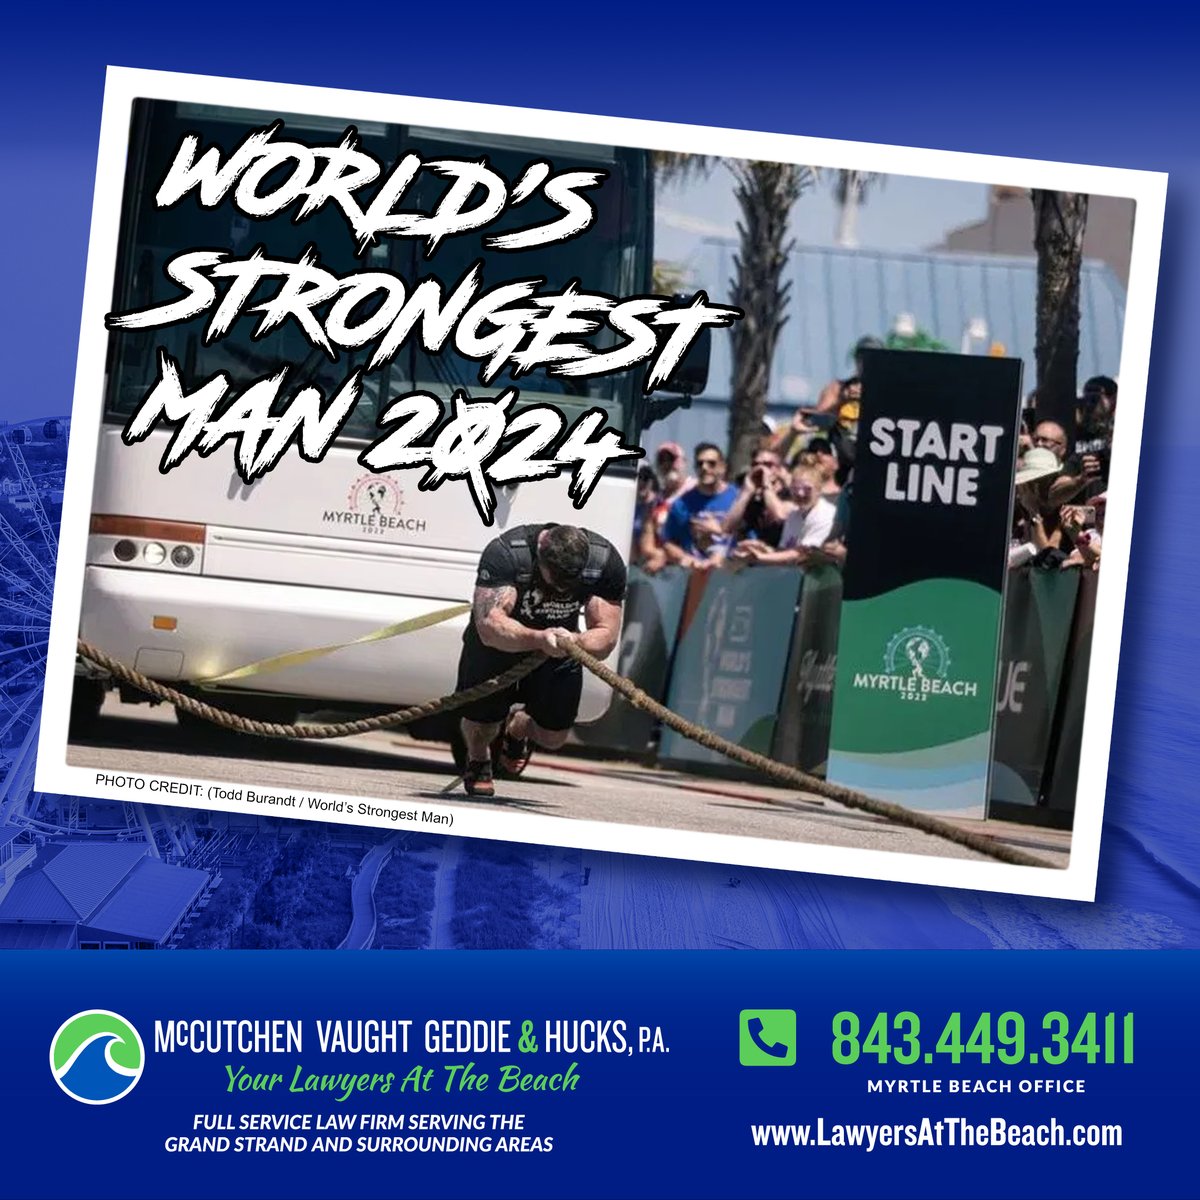 Back on the beach! The World's Strongest Man has returned to Myrtle Beach, SC this week (May 1st-May 5th), promising an epic showdown! Prepare for the fiercest competition in strongman history! Don't miss this heart-pounding event by the oceanfront!